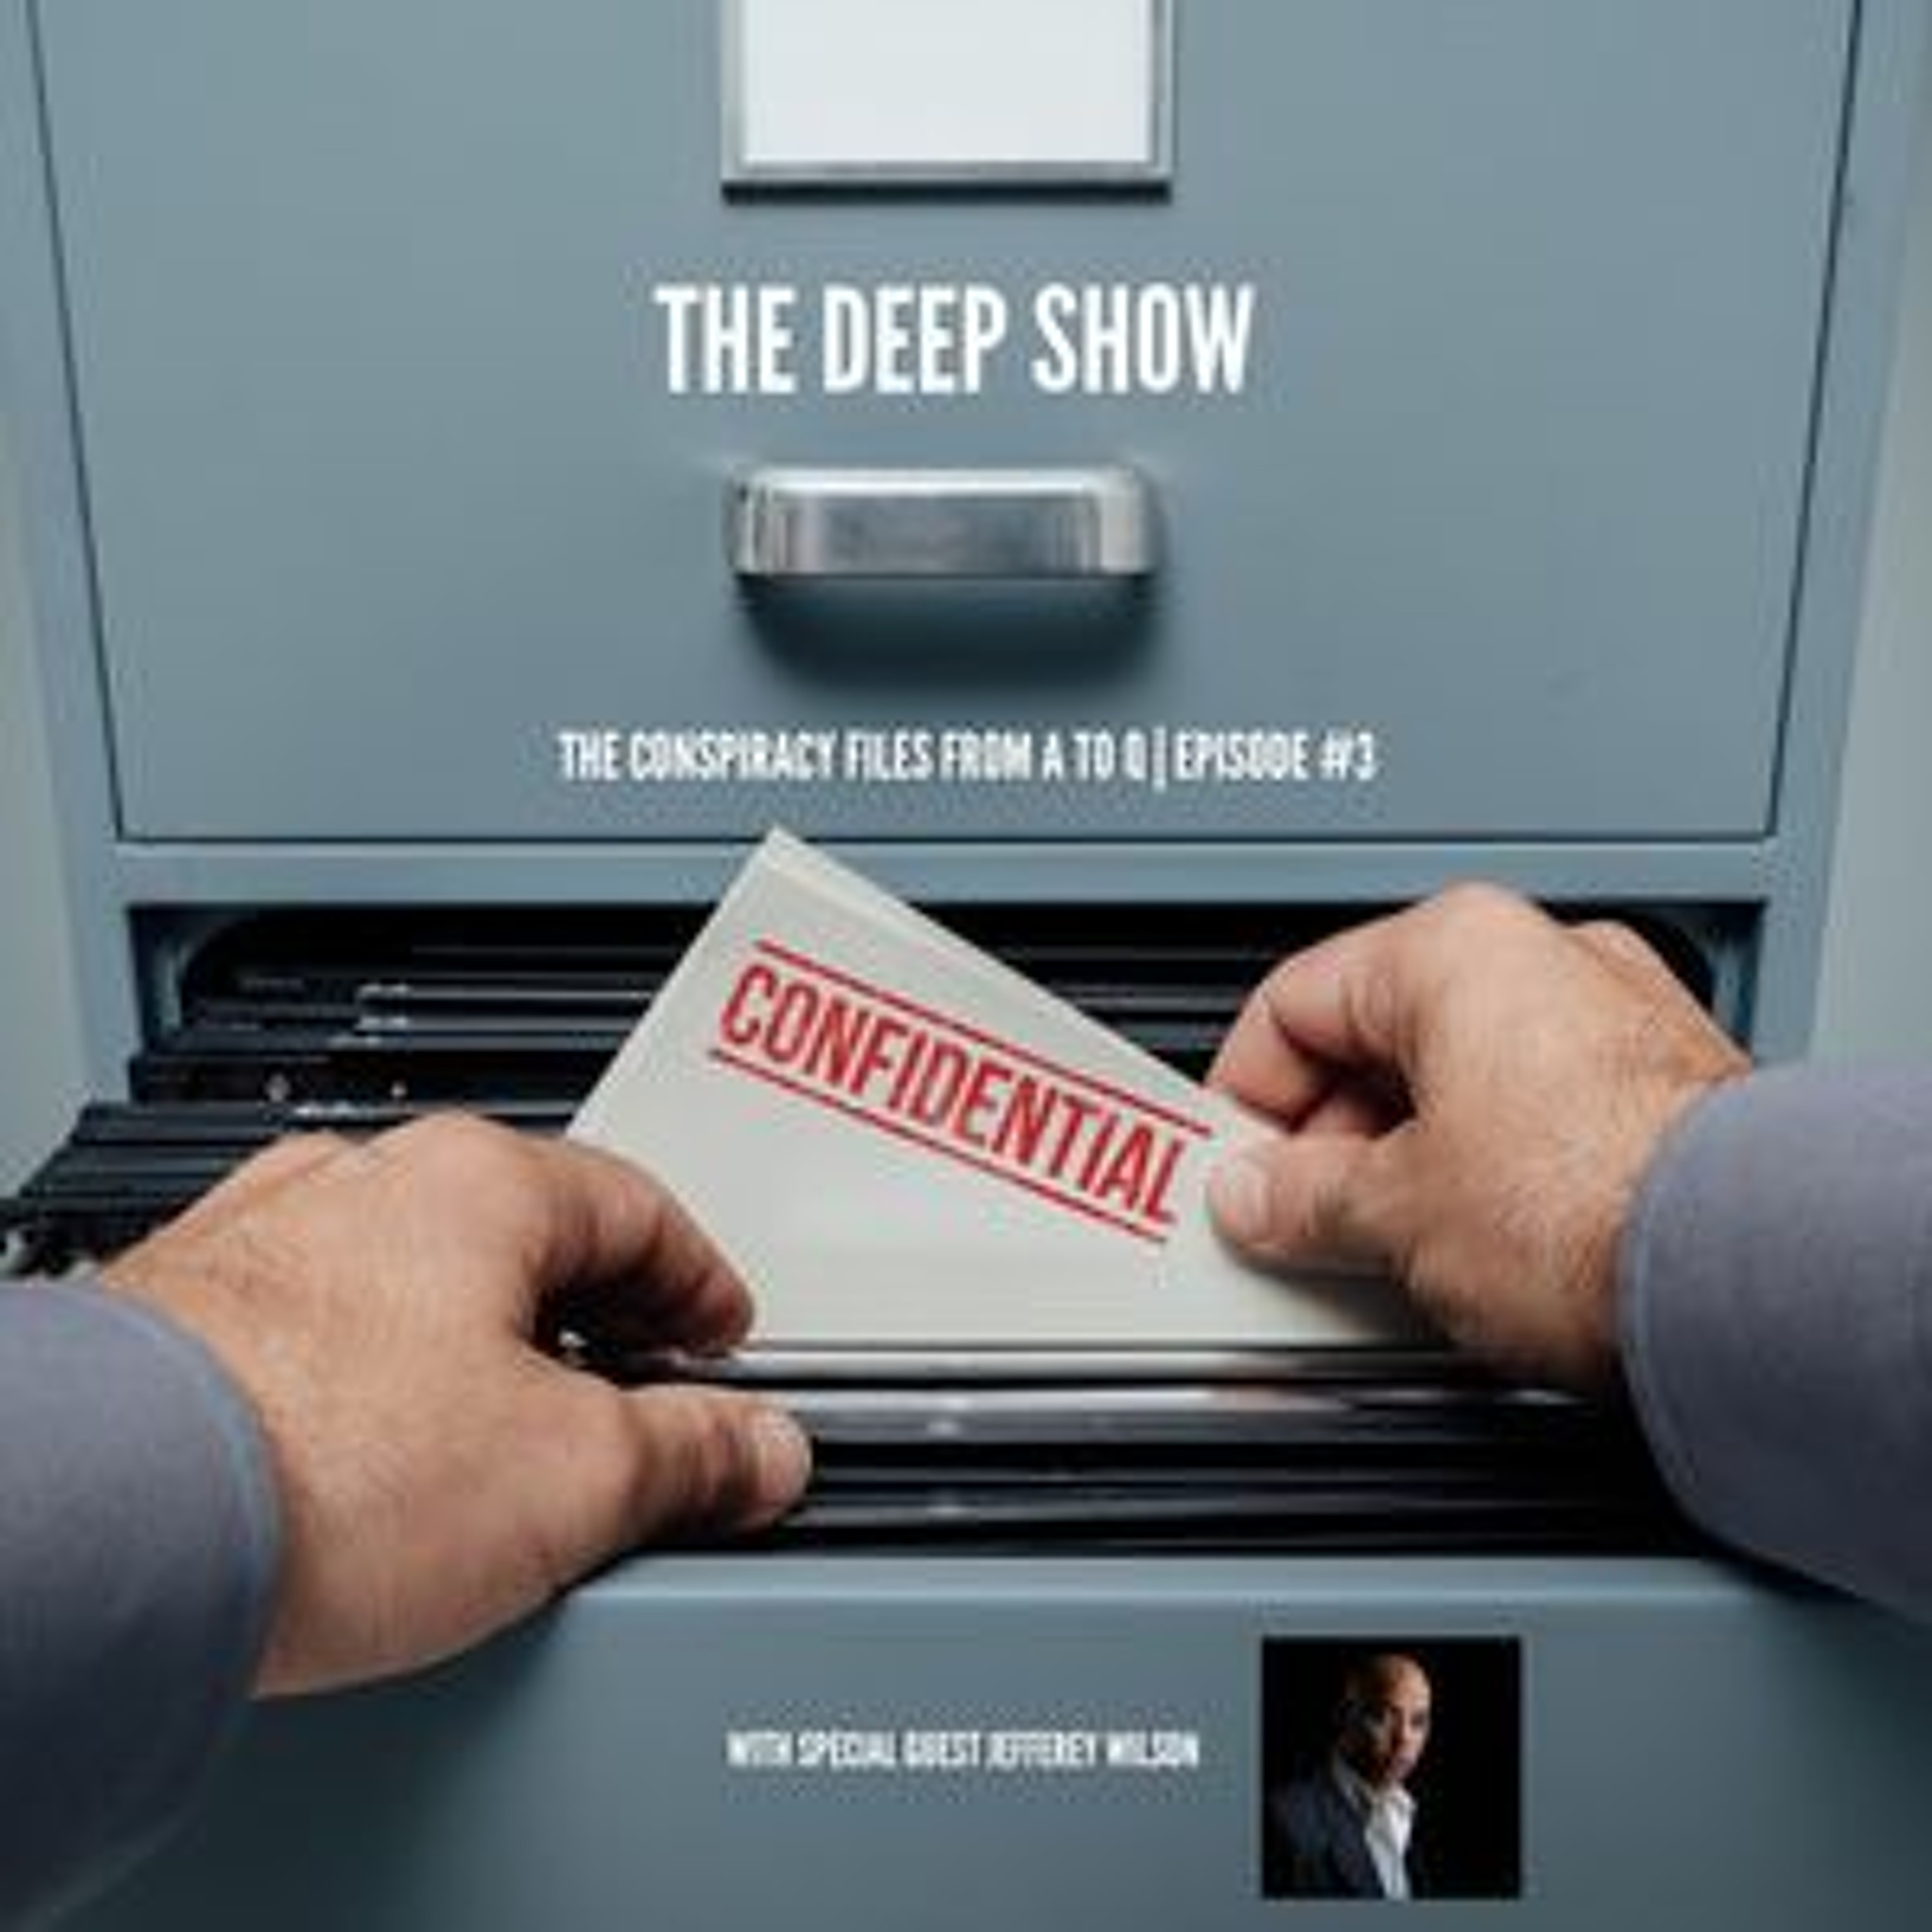 #SWAPCAST! The Deep Show EPISODE 3- Jeffery Wilson- The Conspiracy Files A to Q